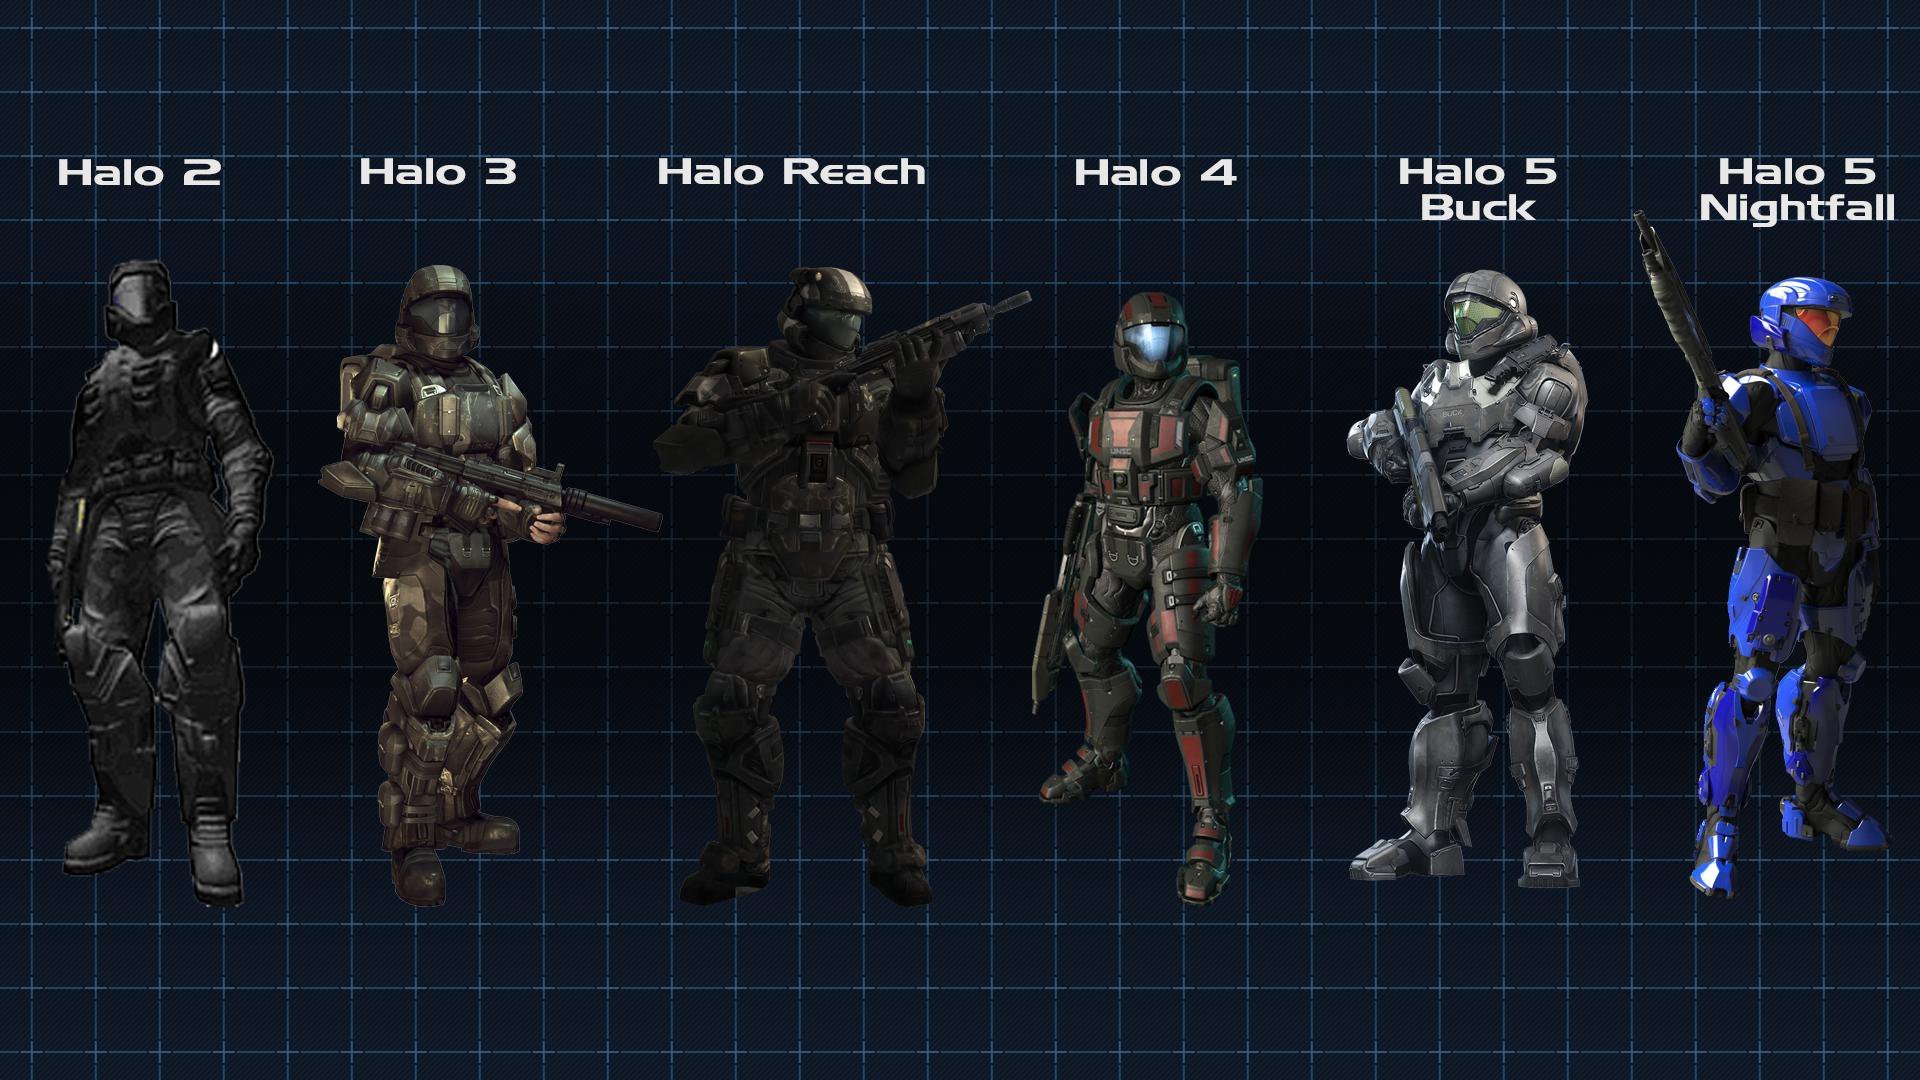 A lineup of the ODST armors from Halo 2 through Halo 5: halo.